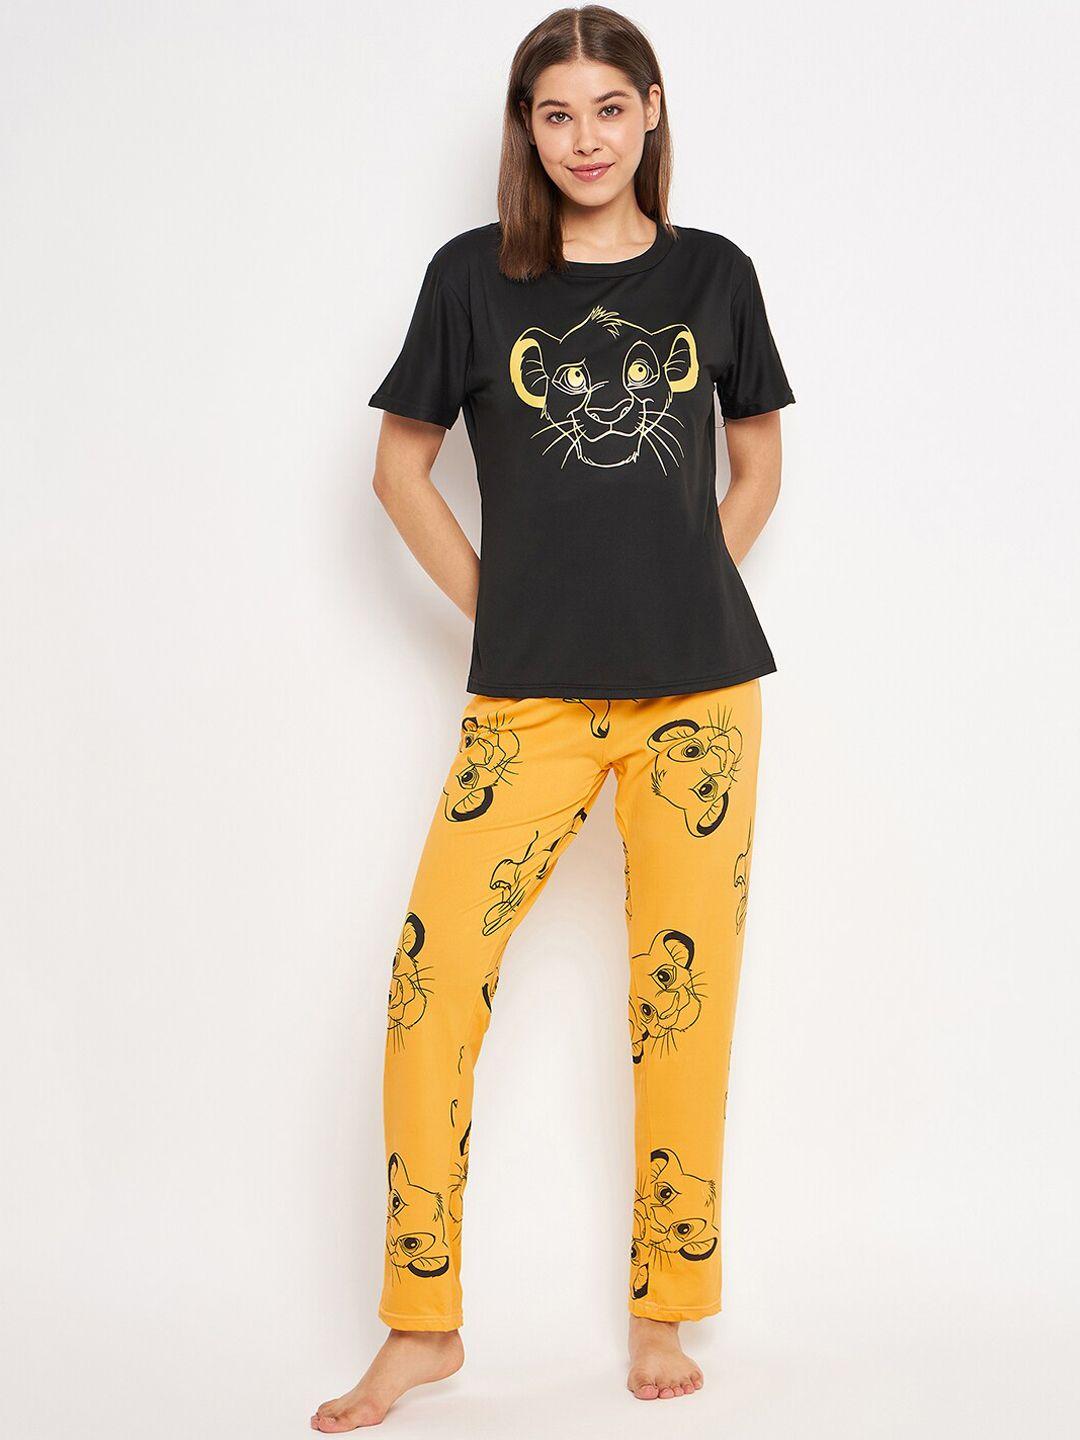 camey lion king printed night suit